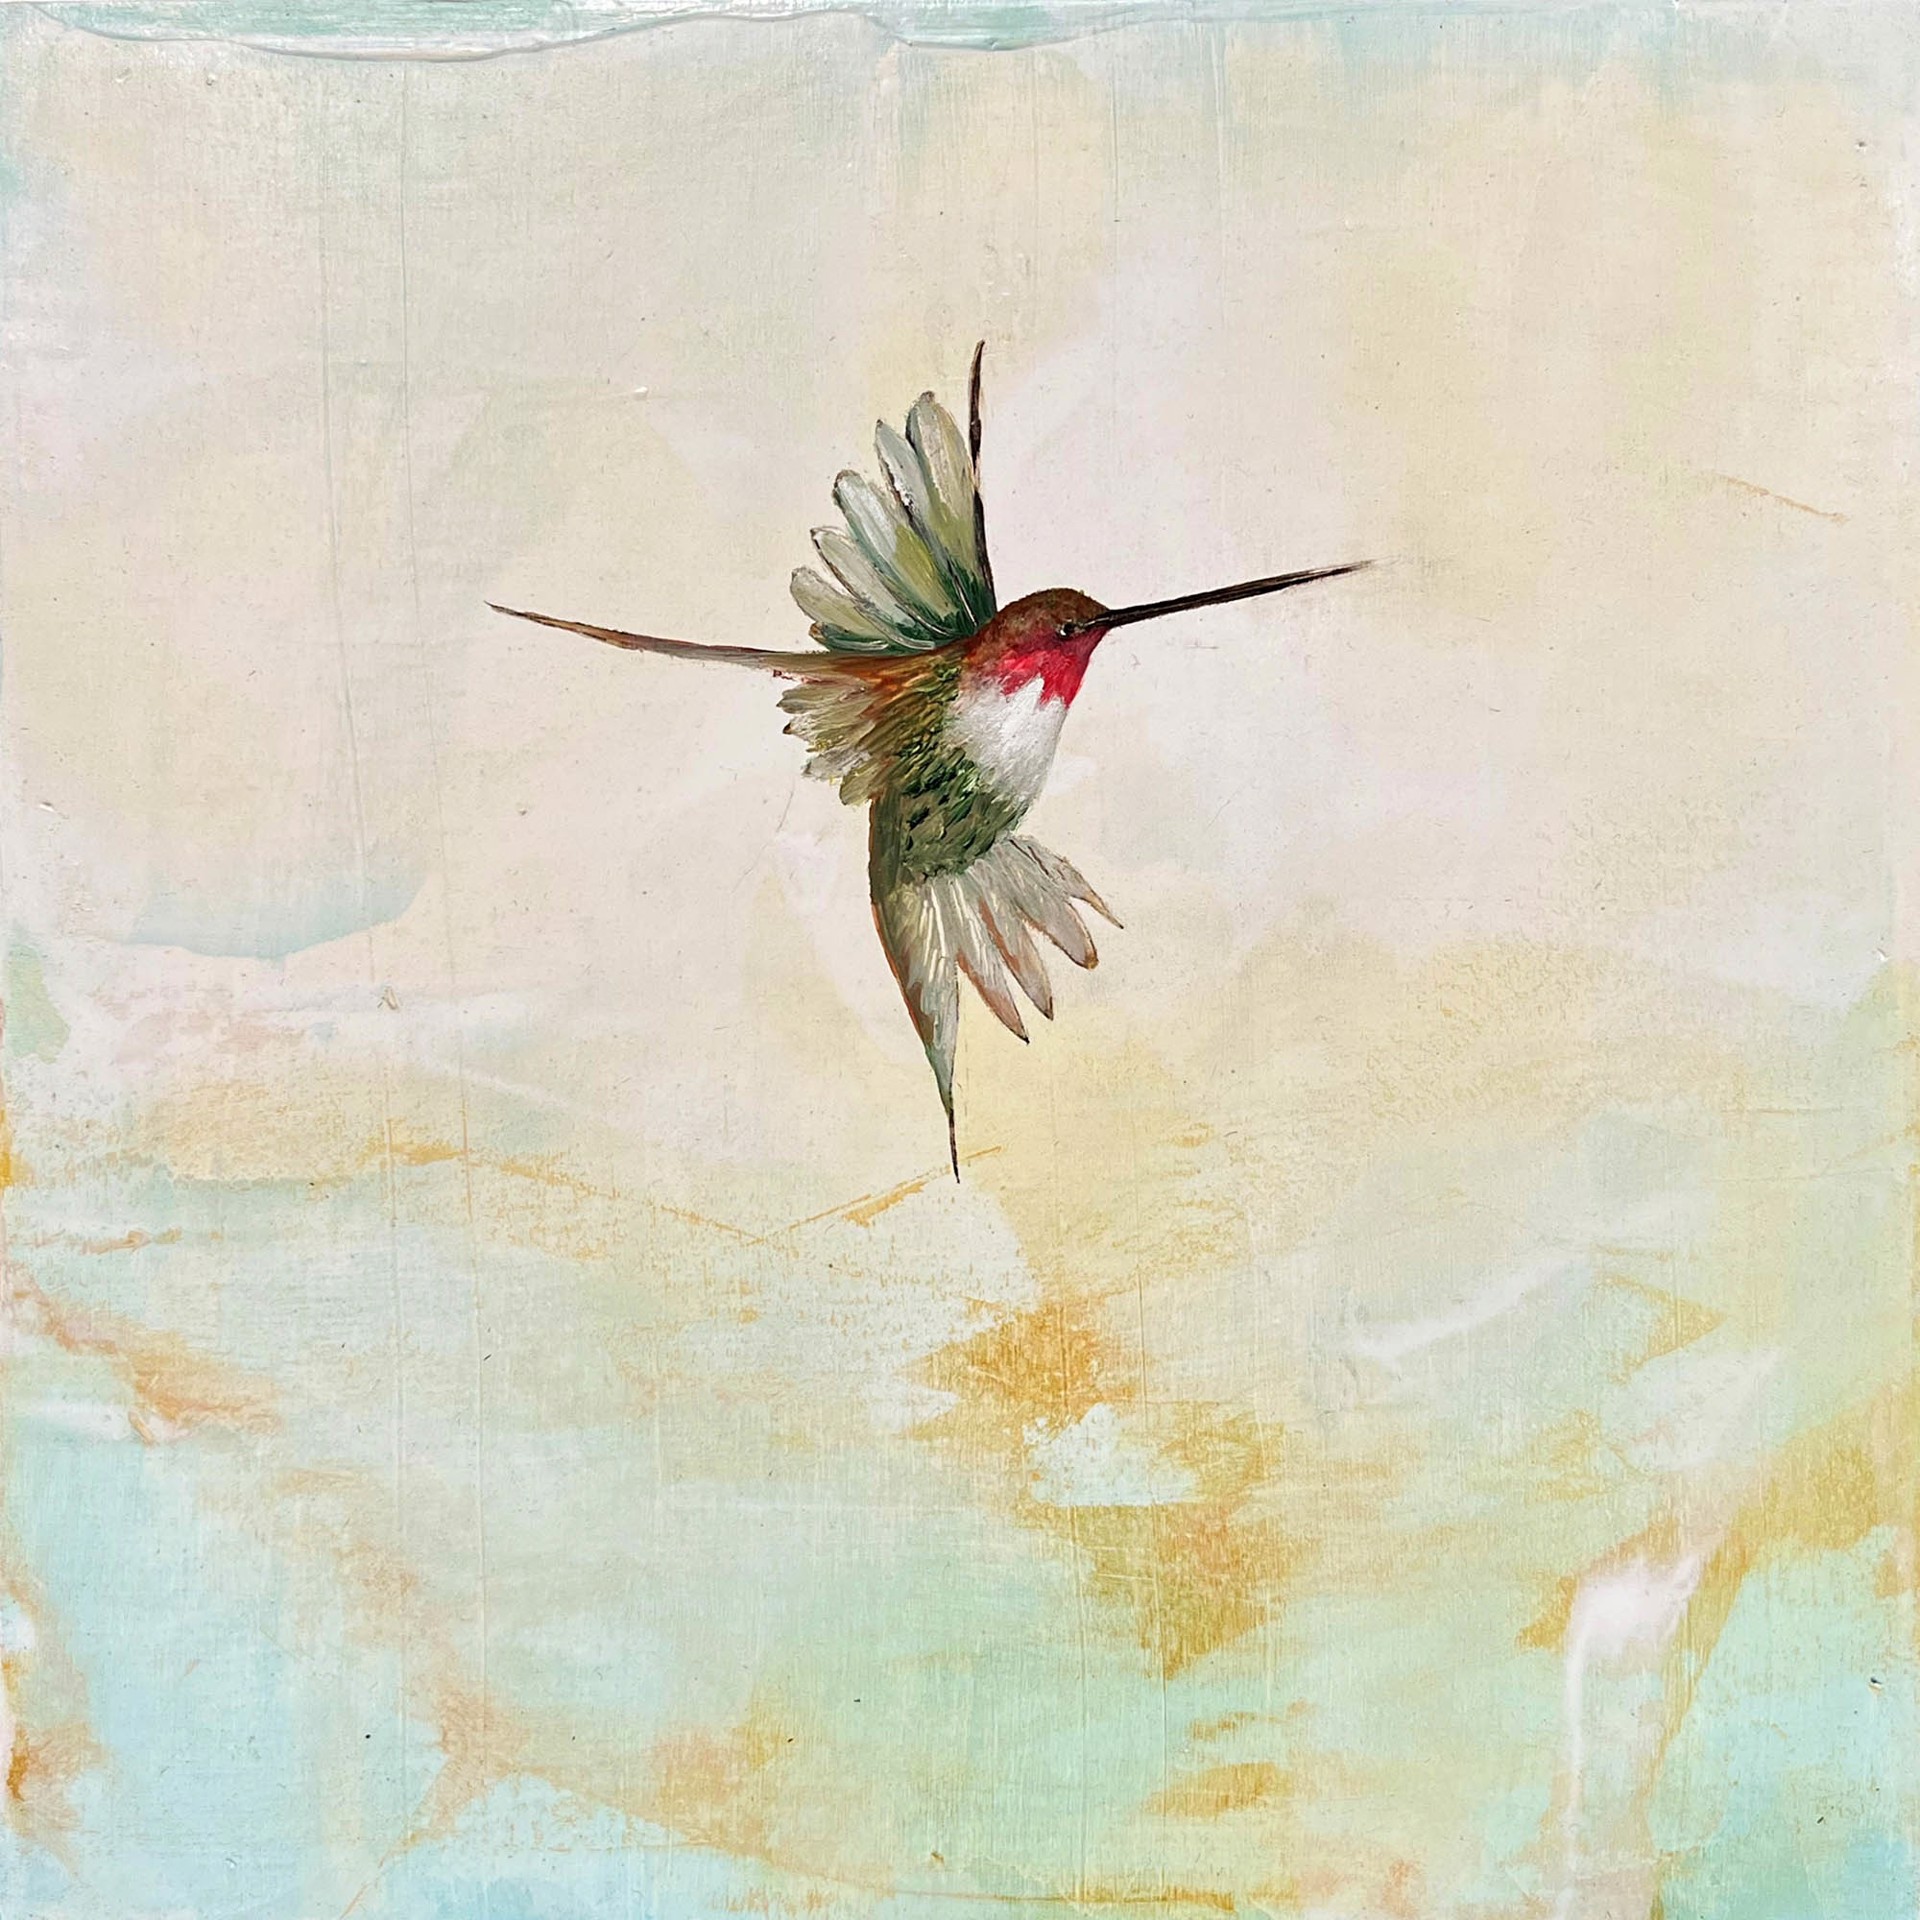 Original Oil Painting Featuring A Single Hummingbird Over Abstract Green And Gold Background